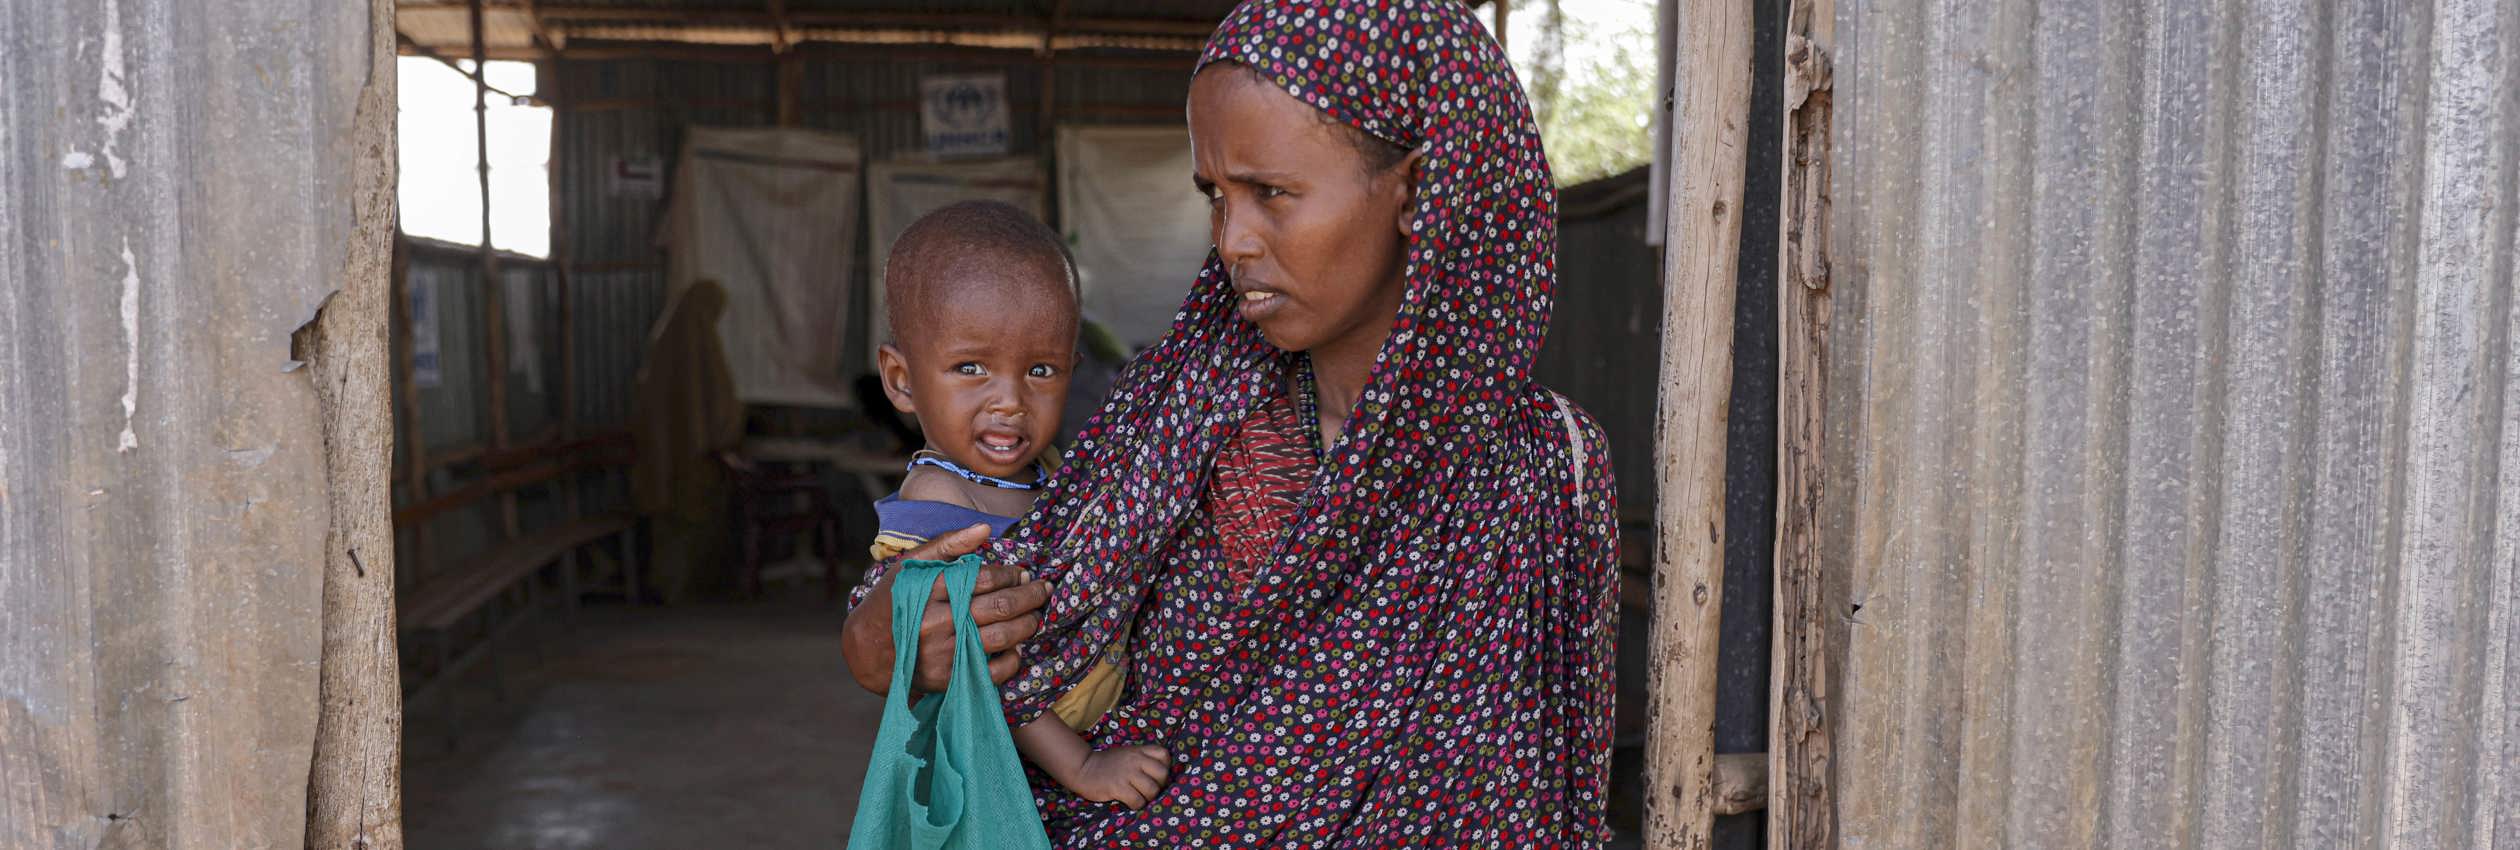 Samira Abdi, 28 waits to receive food and treatment for her malnourished child at the Melkadida UNHCR supported food distribution centre in Melkadida